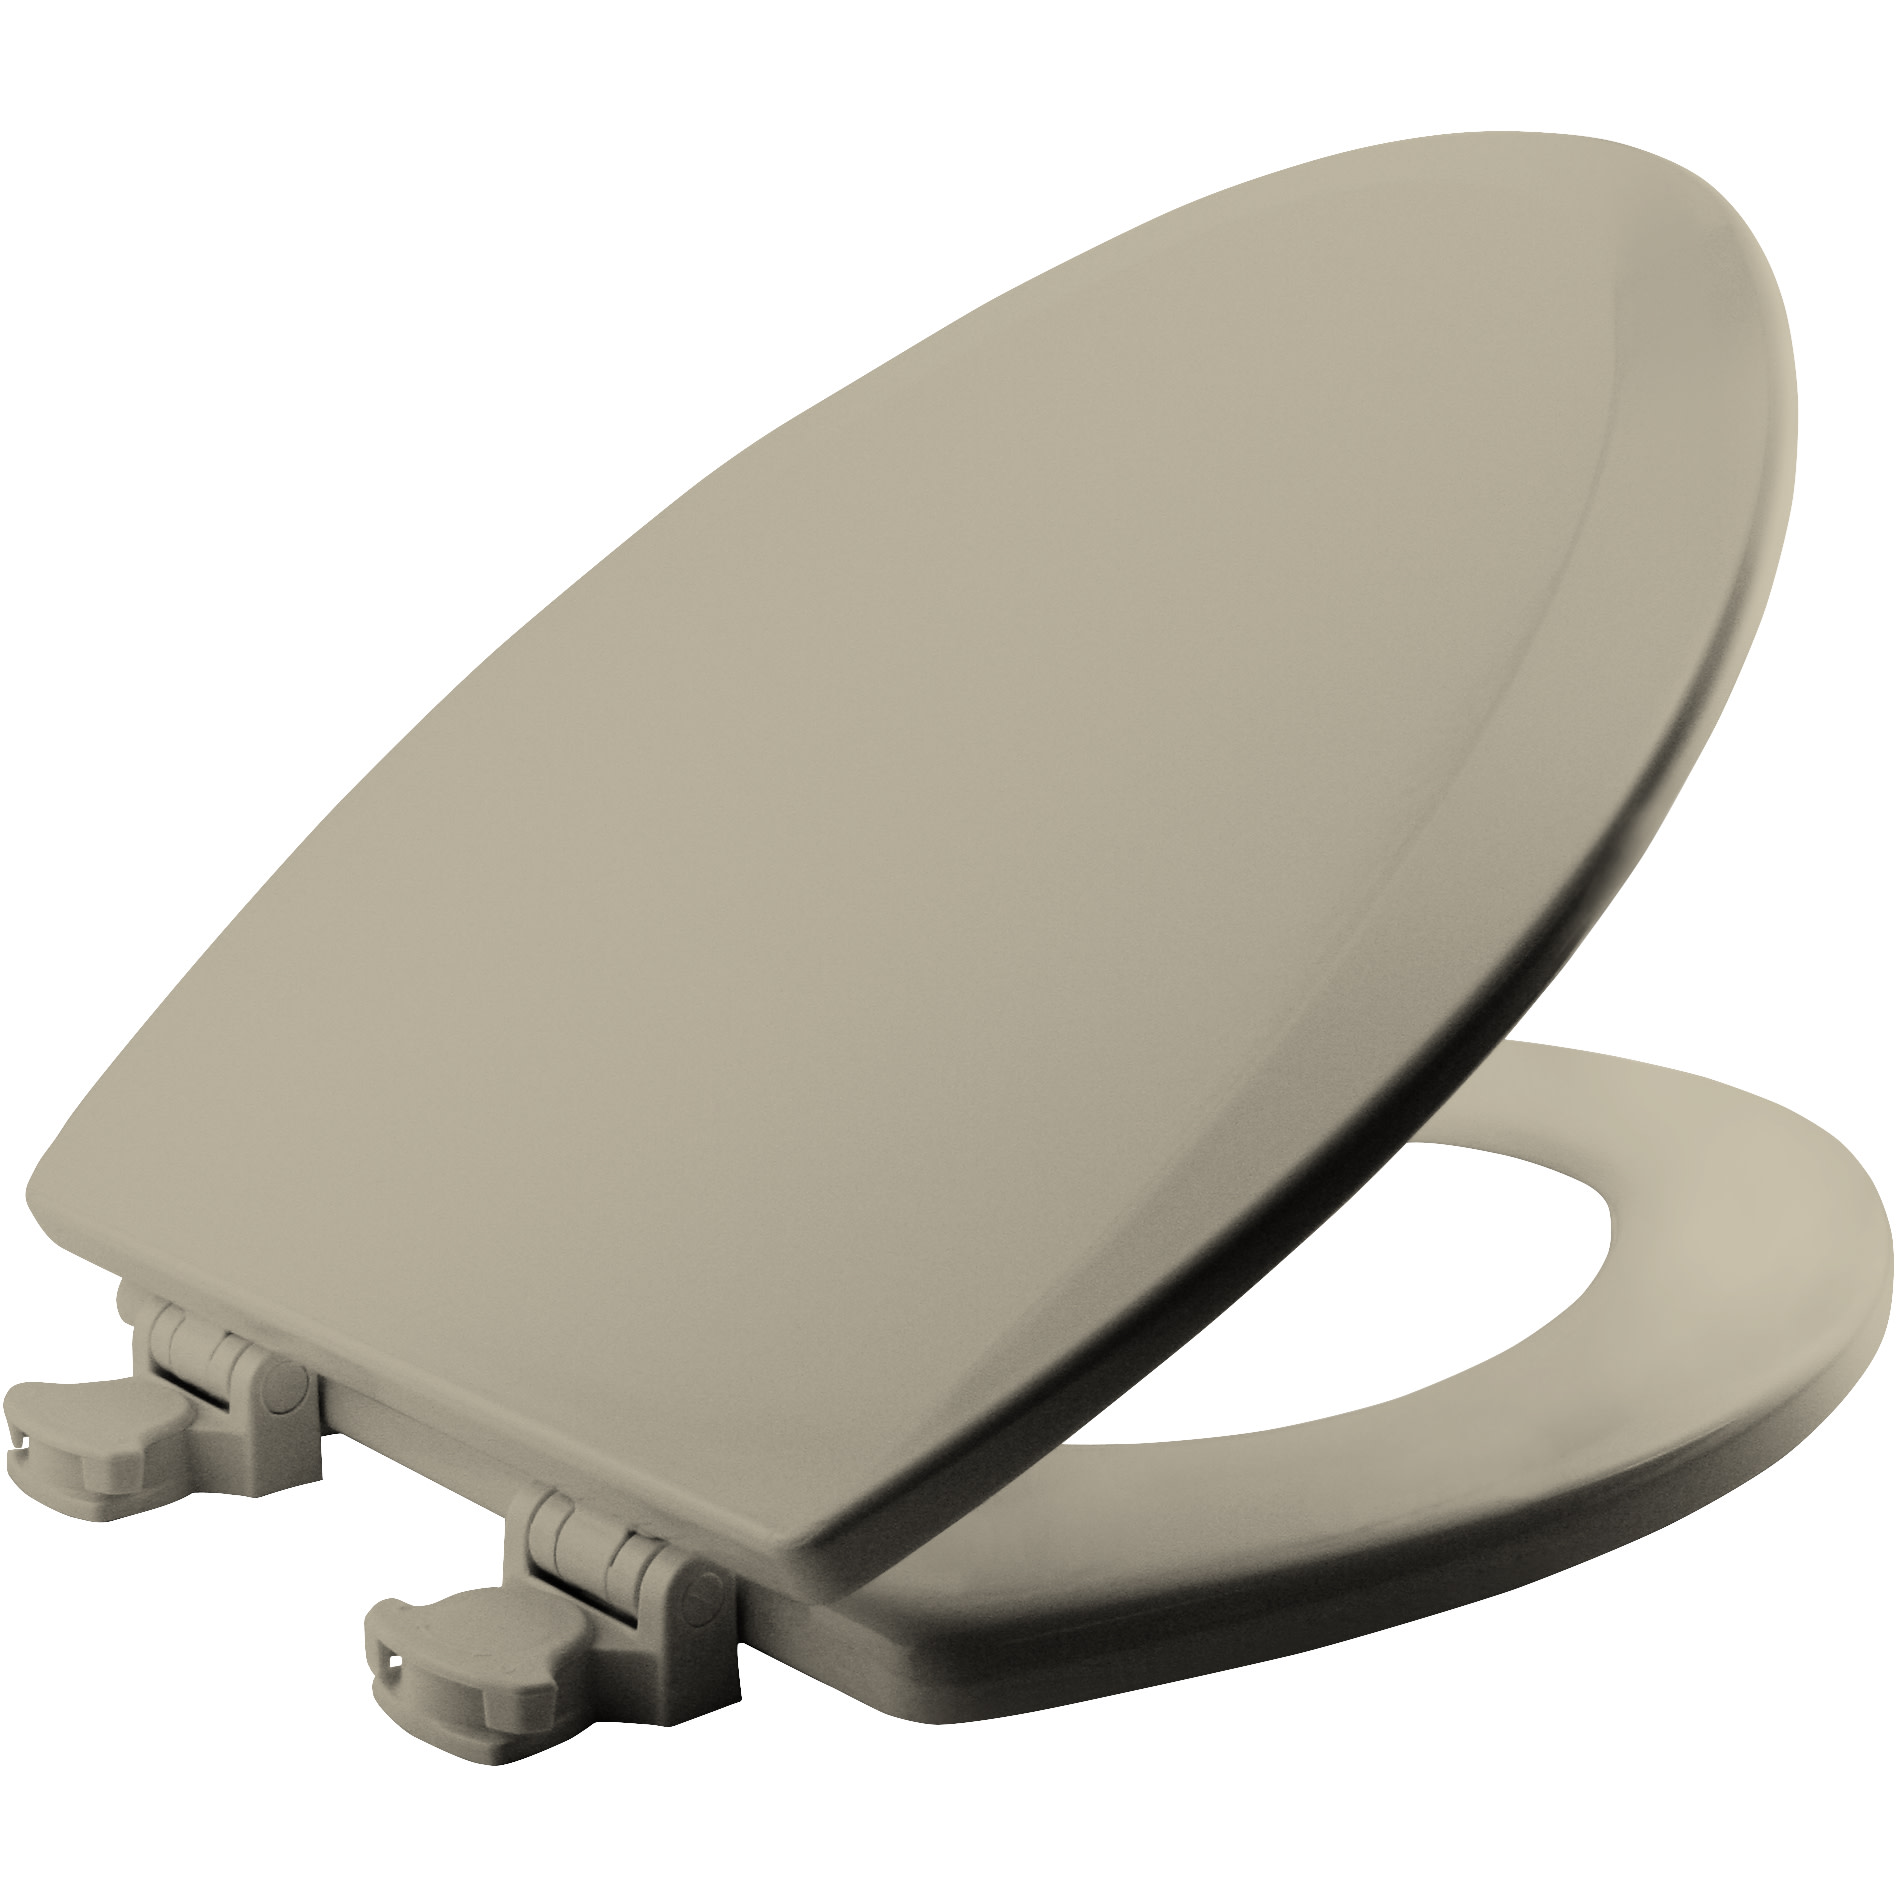 for sale online Bemis 1500EC000 White Easy Clean Elongated Closed Front Wooden Toilet Seat Including Cover 73088126320 